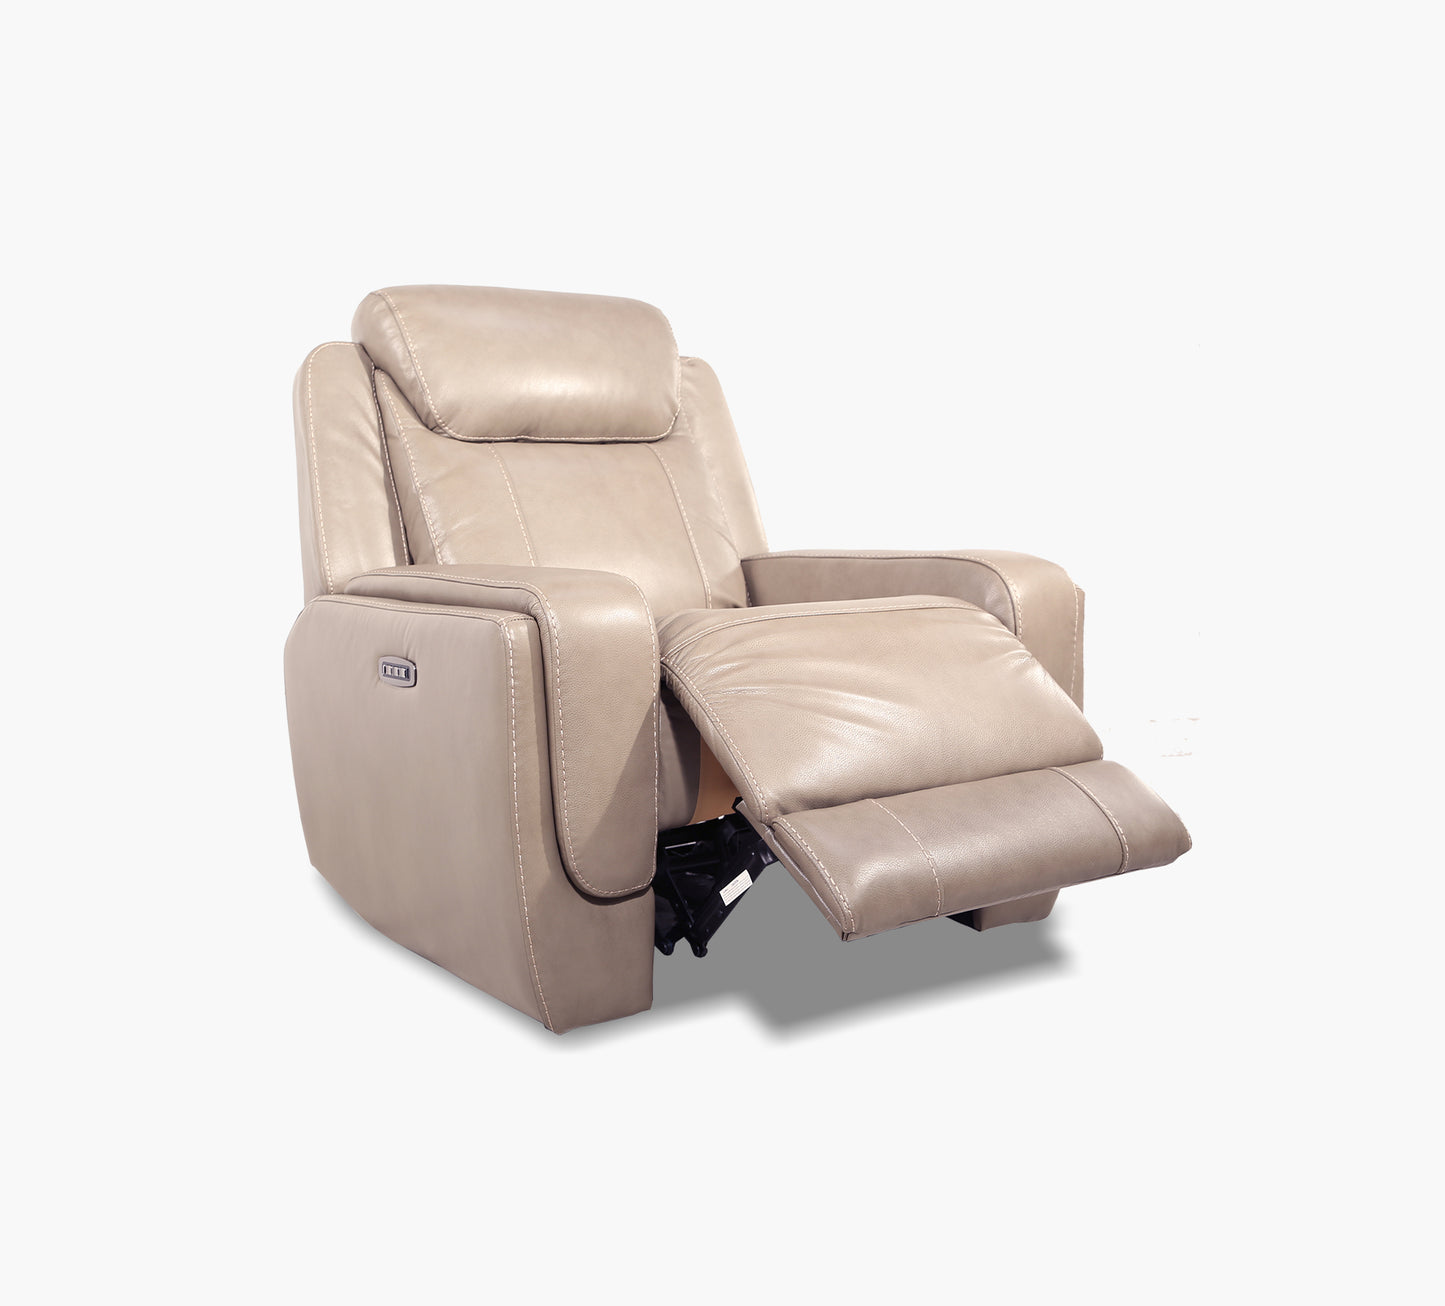 Woodford Fawn Leather Triple Power Recliner